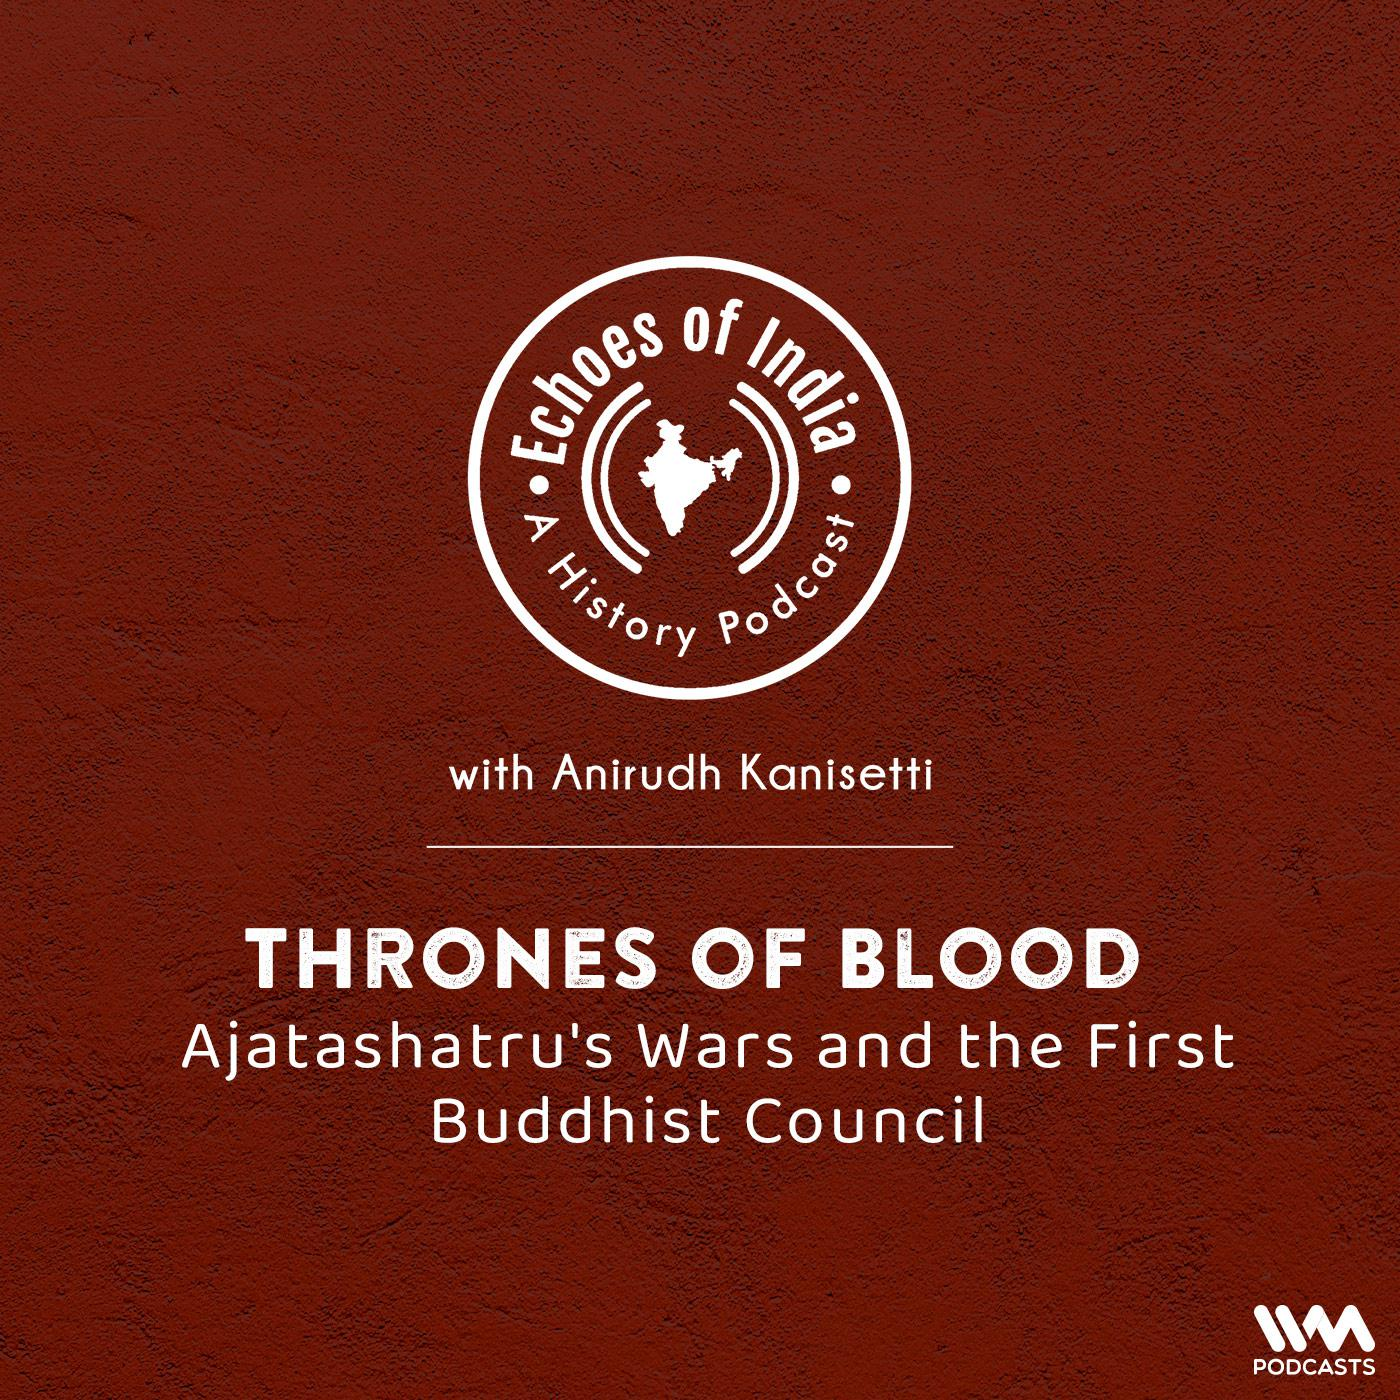 Thrones of Blood: Ajatashatru's Wars and the First Buddhist Council